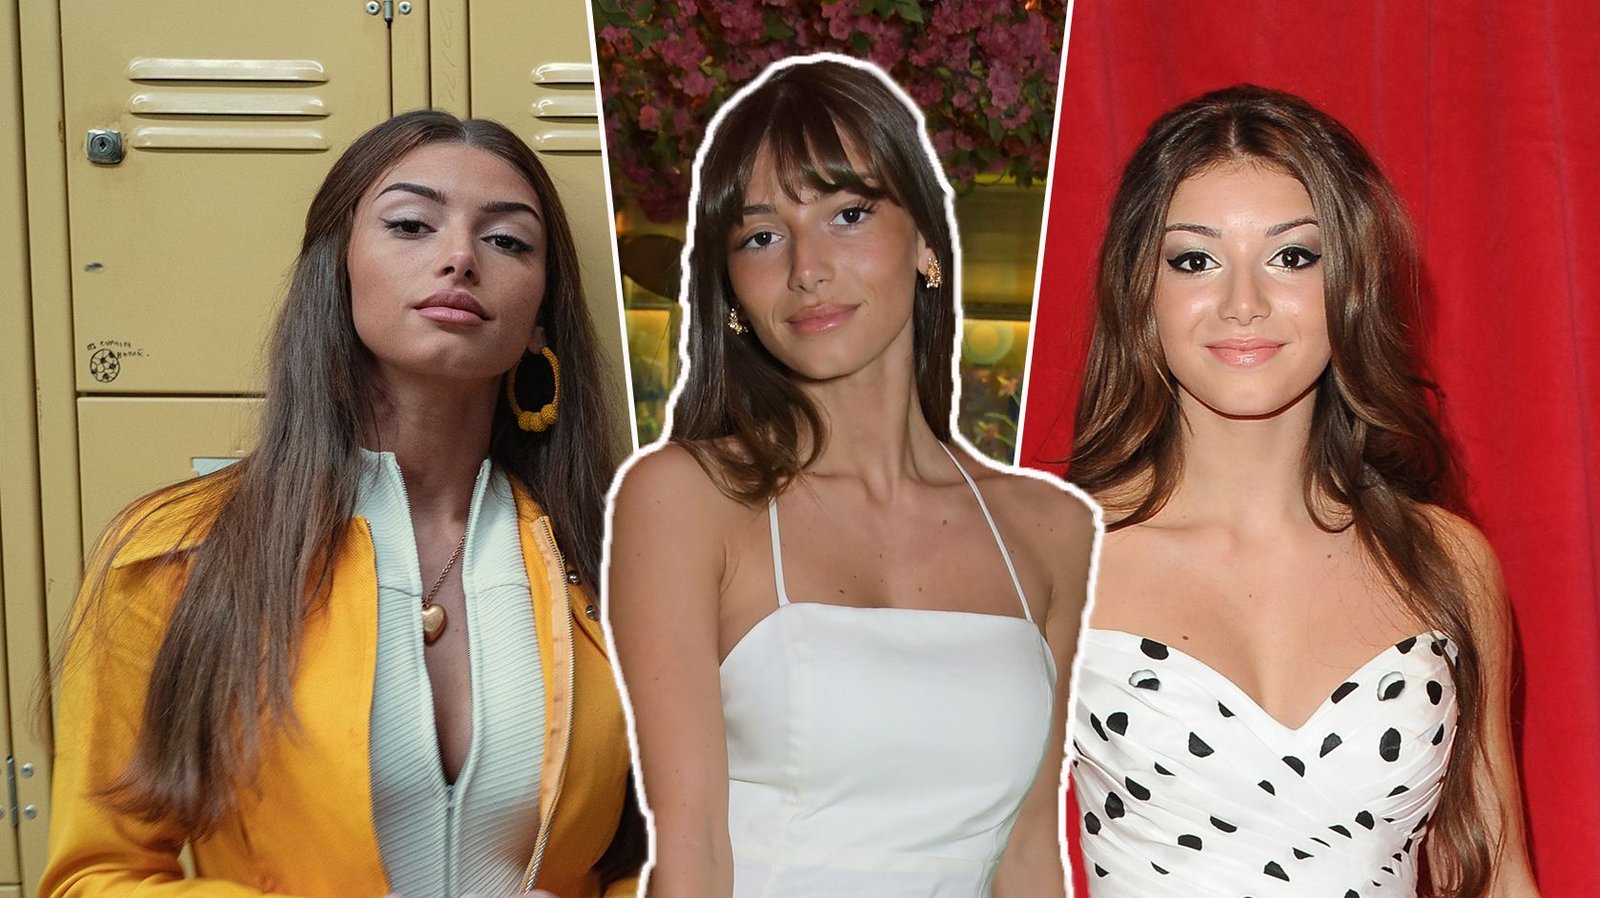 From EastEnders to Sex Education: The Rise of Mimi Keene